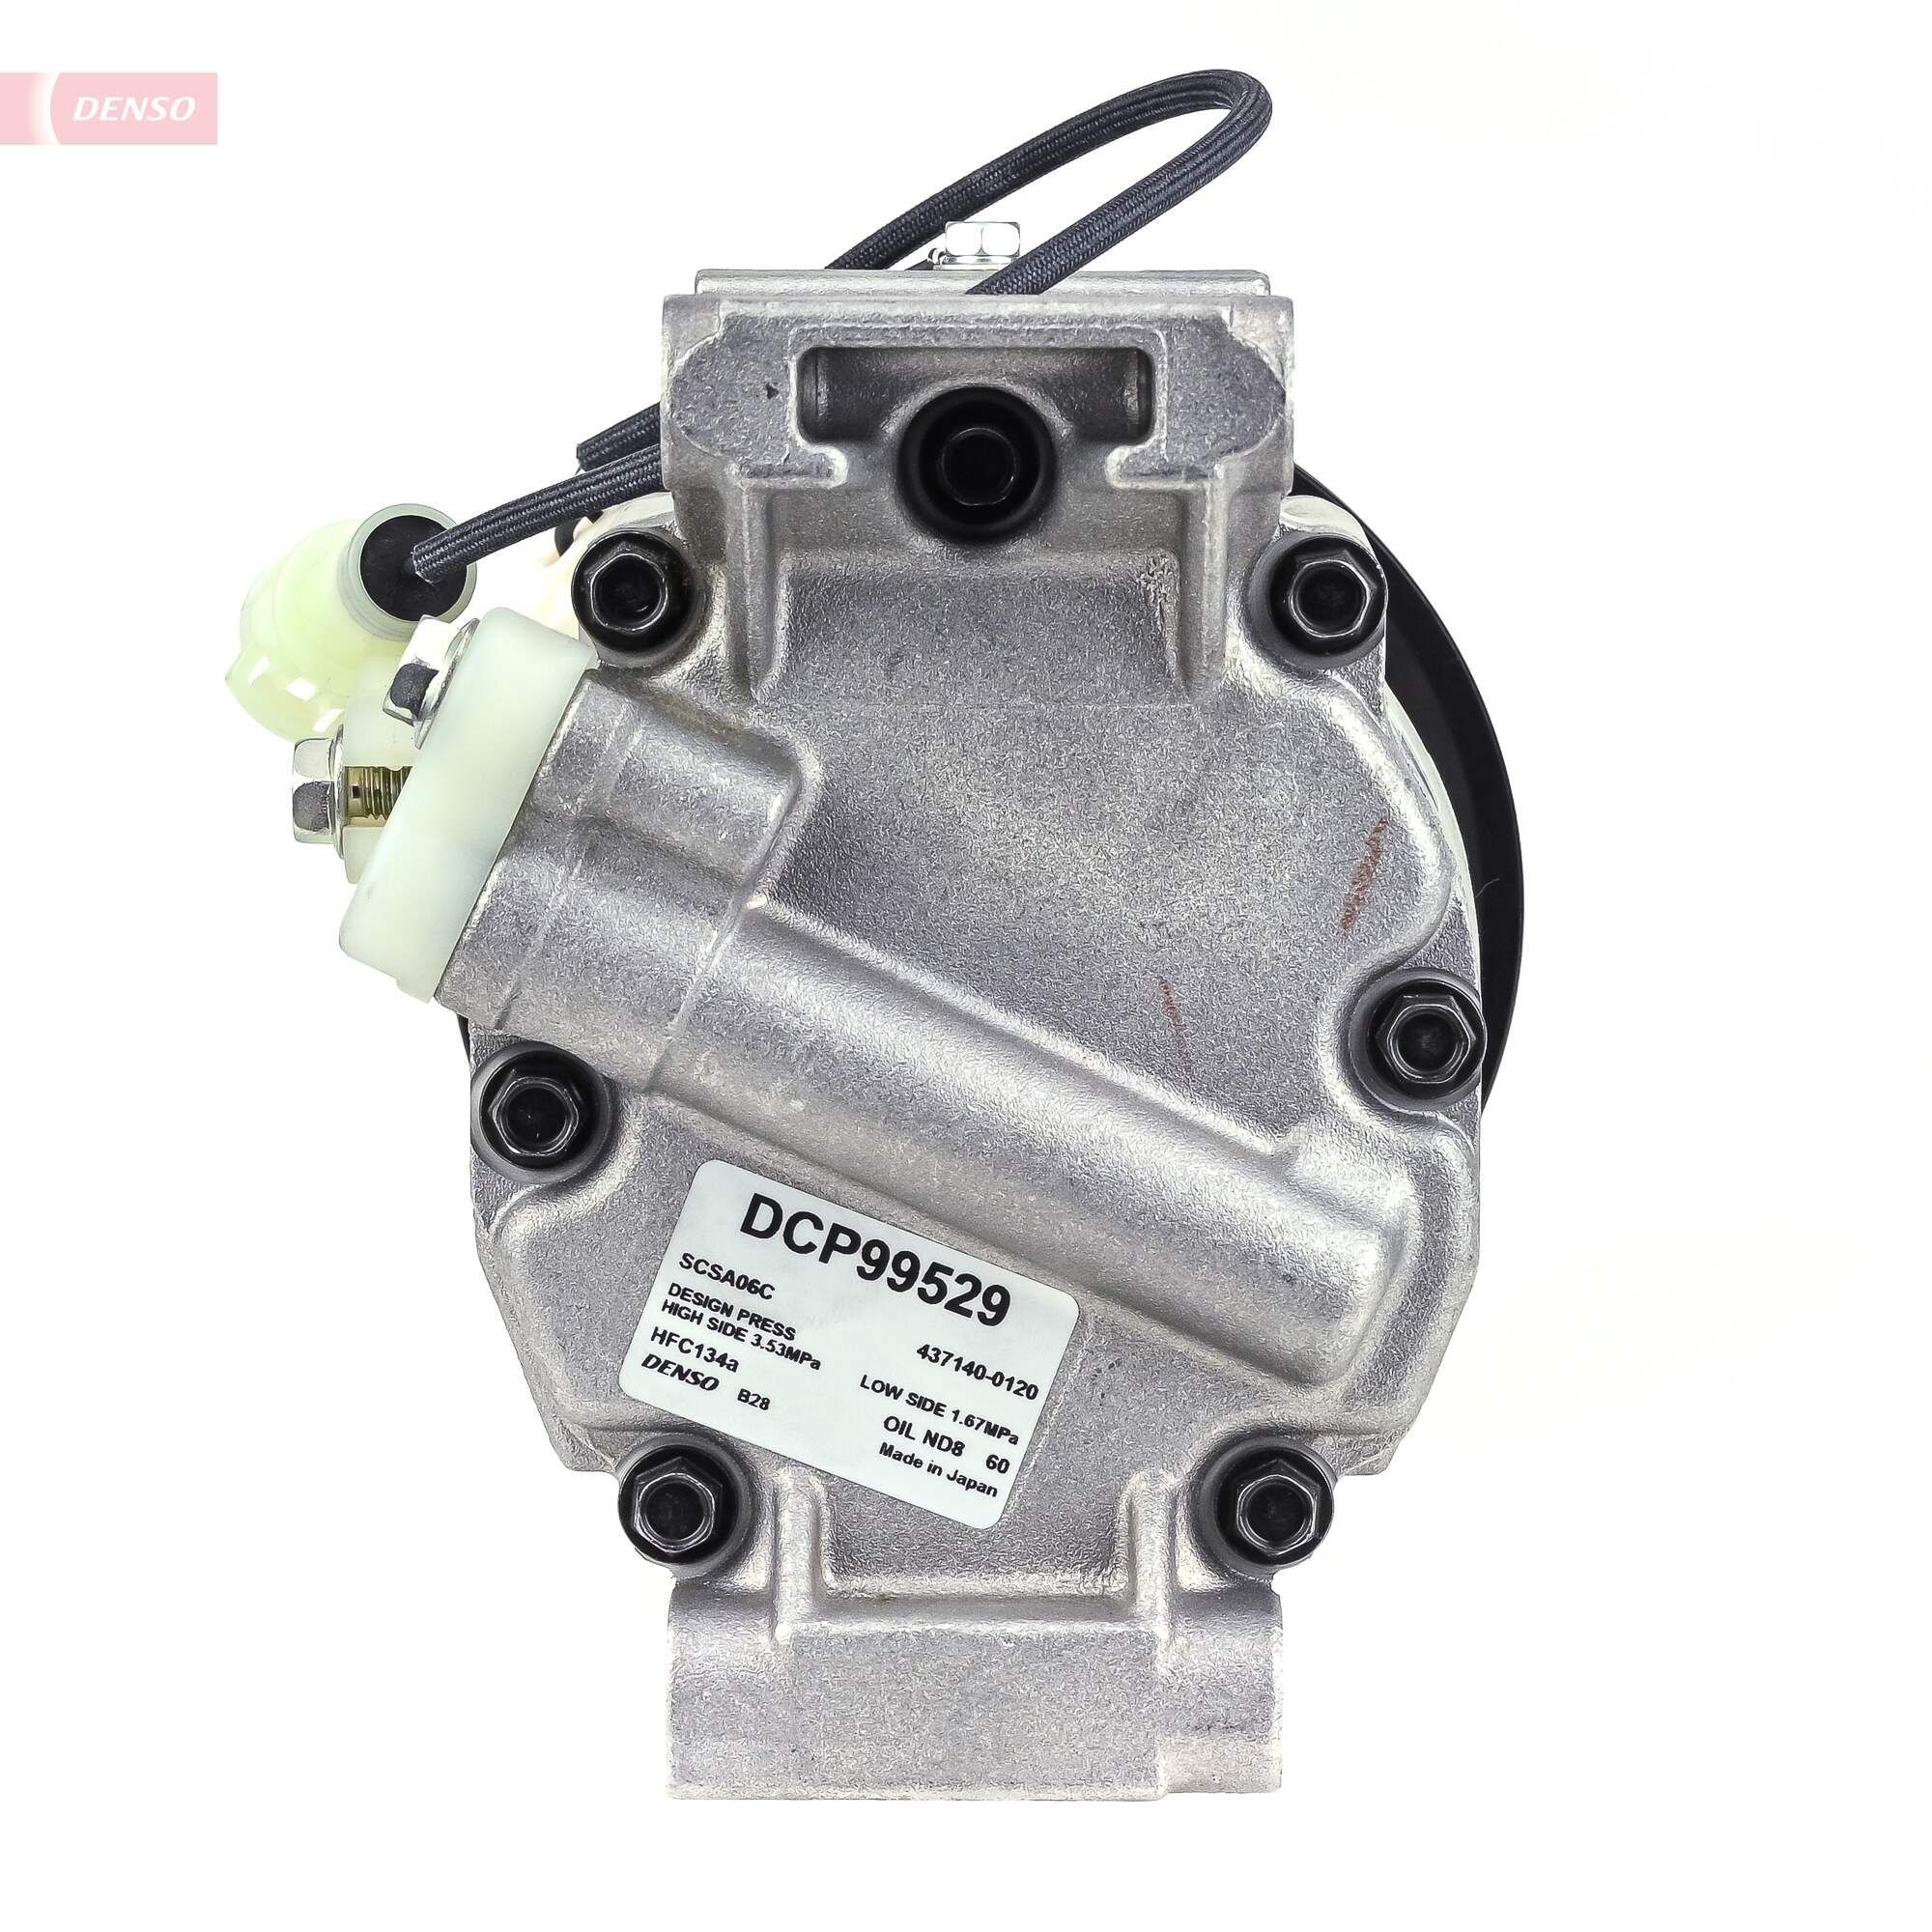 DENSO DCP99529 Air conditioner compressor SCSA06C, 12V, PAG 46, R 134a, with magnetic clutch